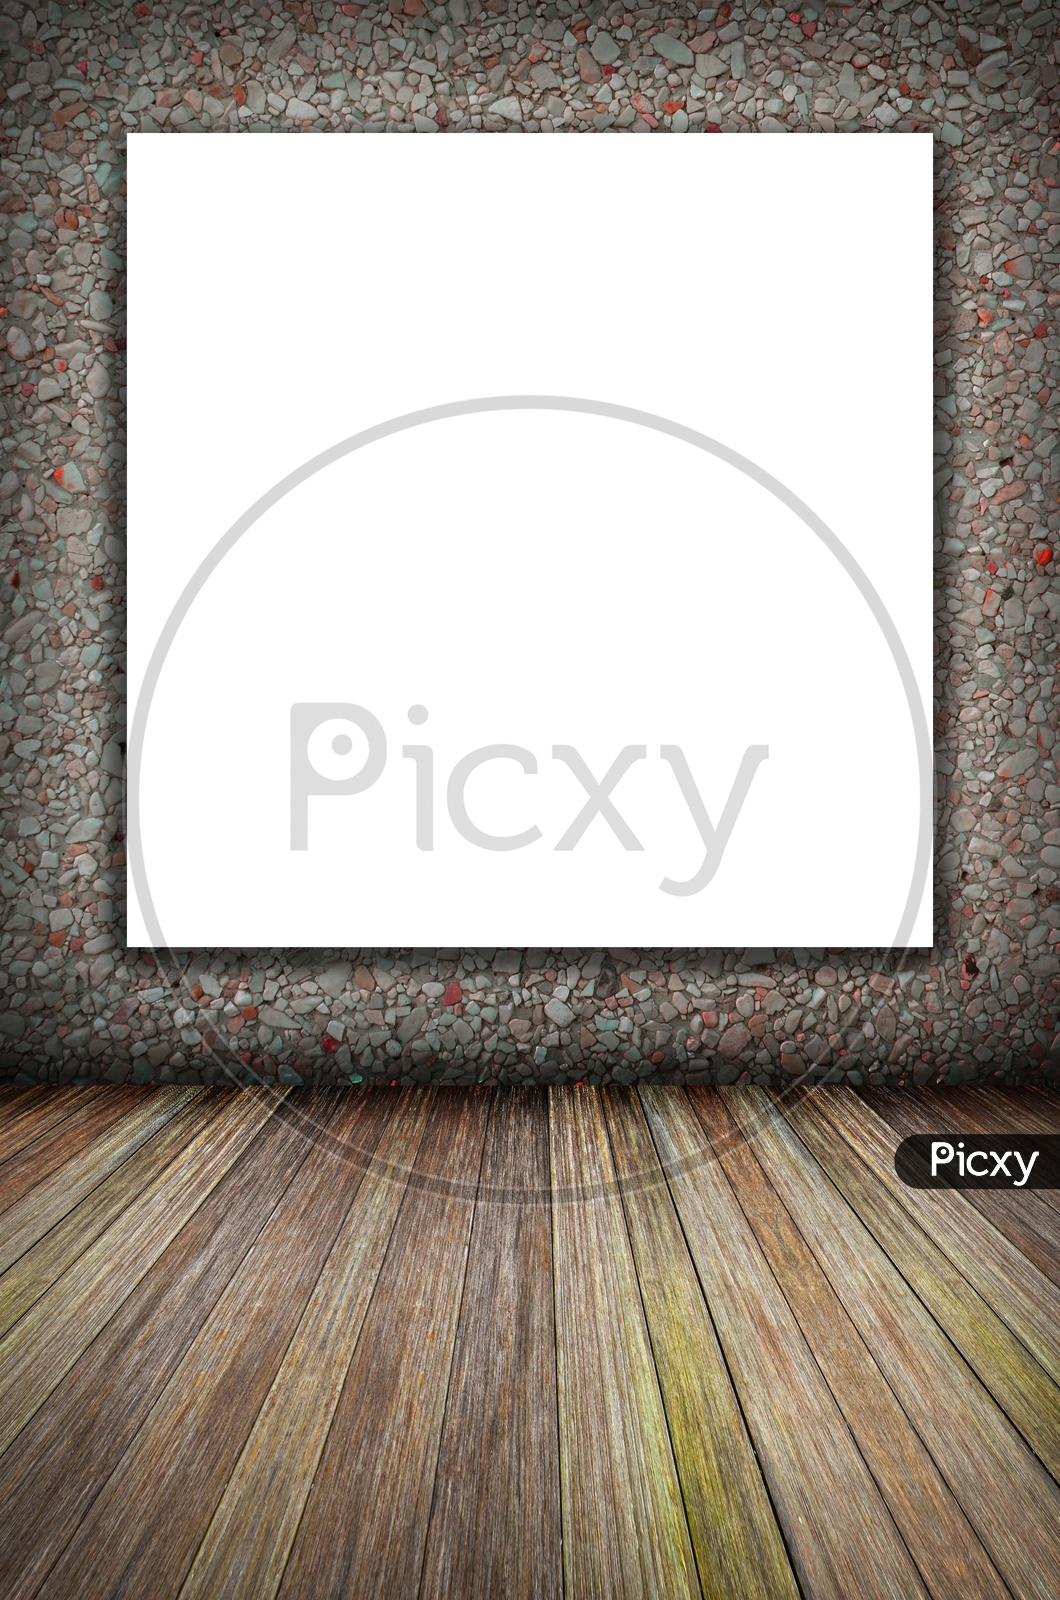 Illustration of Wooden Wall and Stone Floor With Copy Space For Text